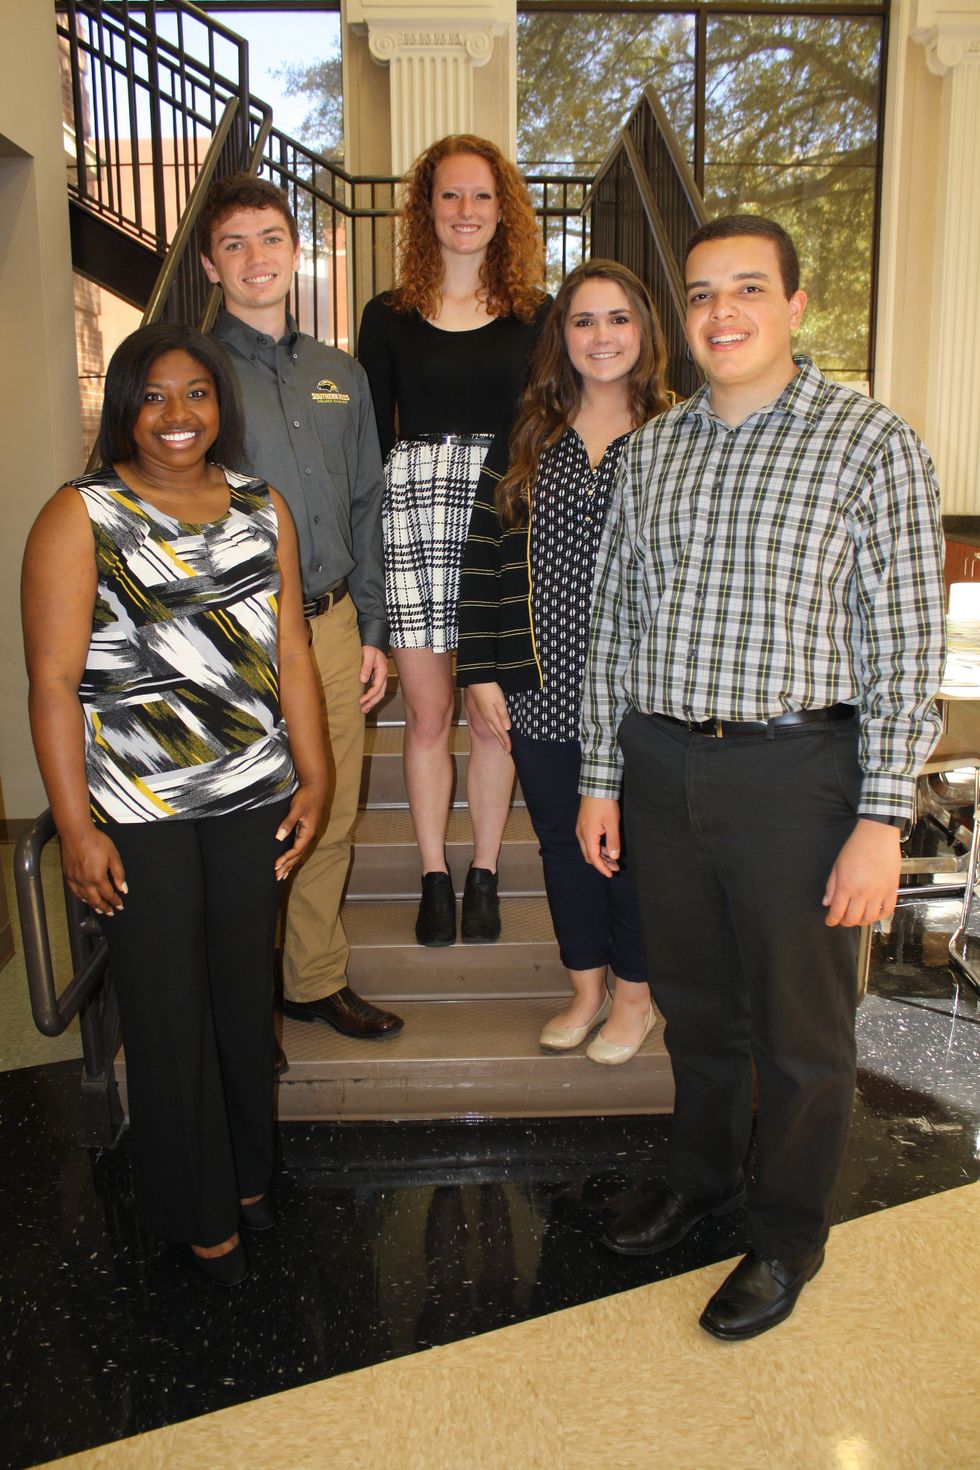 An Open Letter To the Outgoing SGA Officers